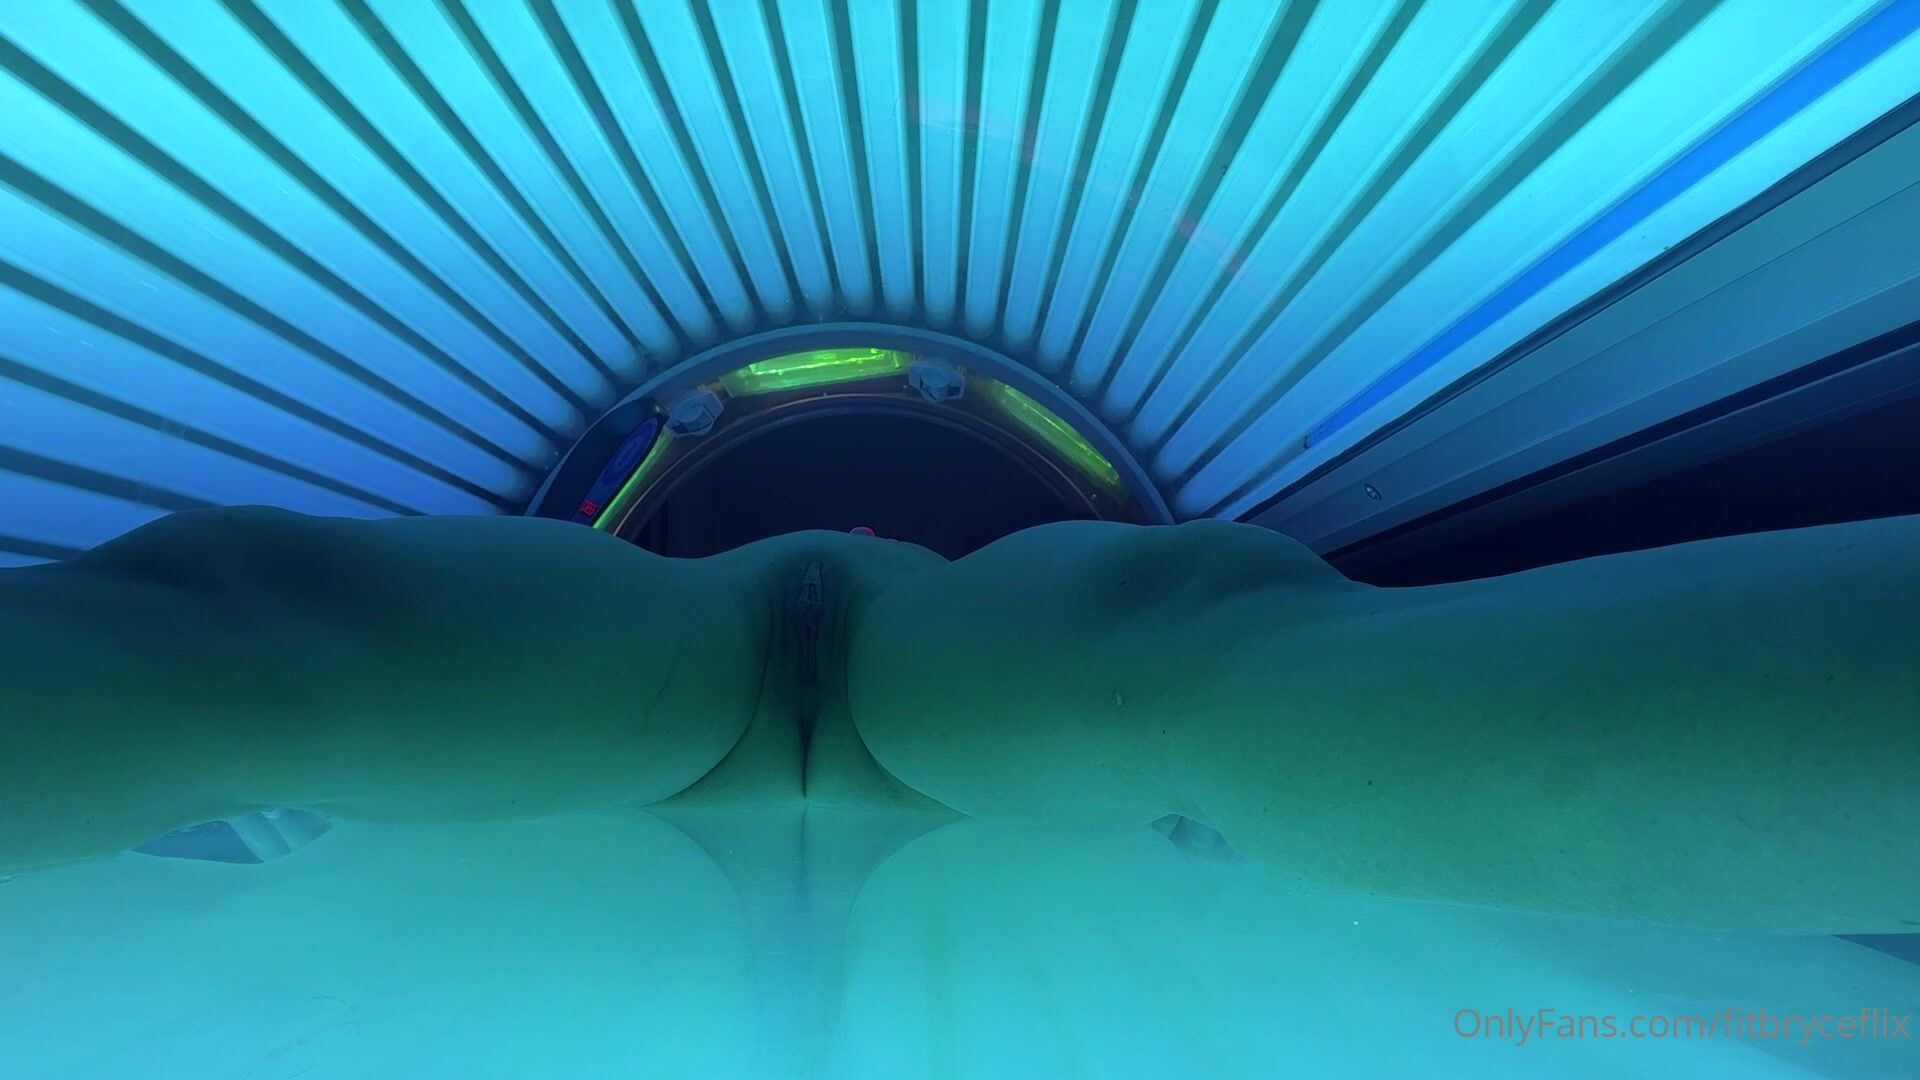 Bryce Adams - PPV Risky Squirting In The Tanning Bed